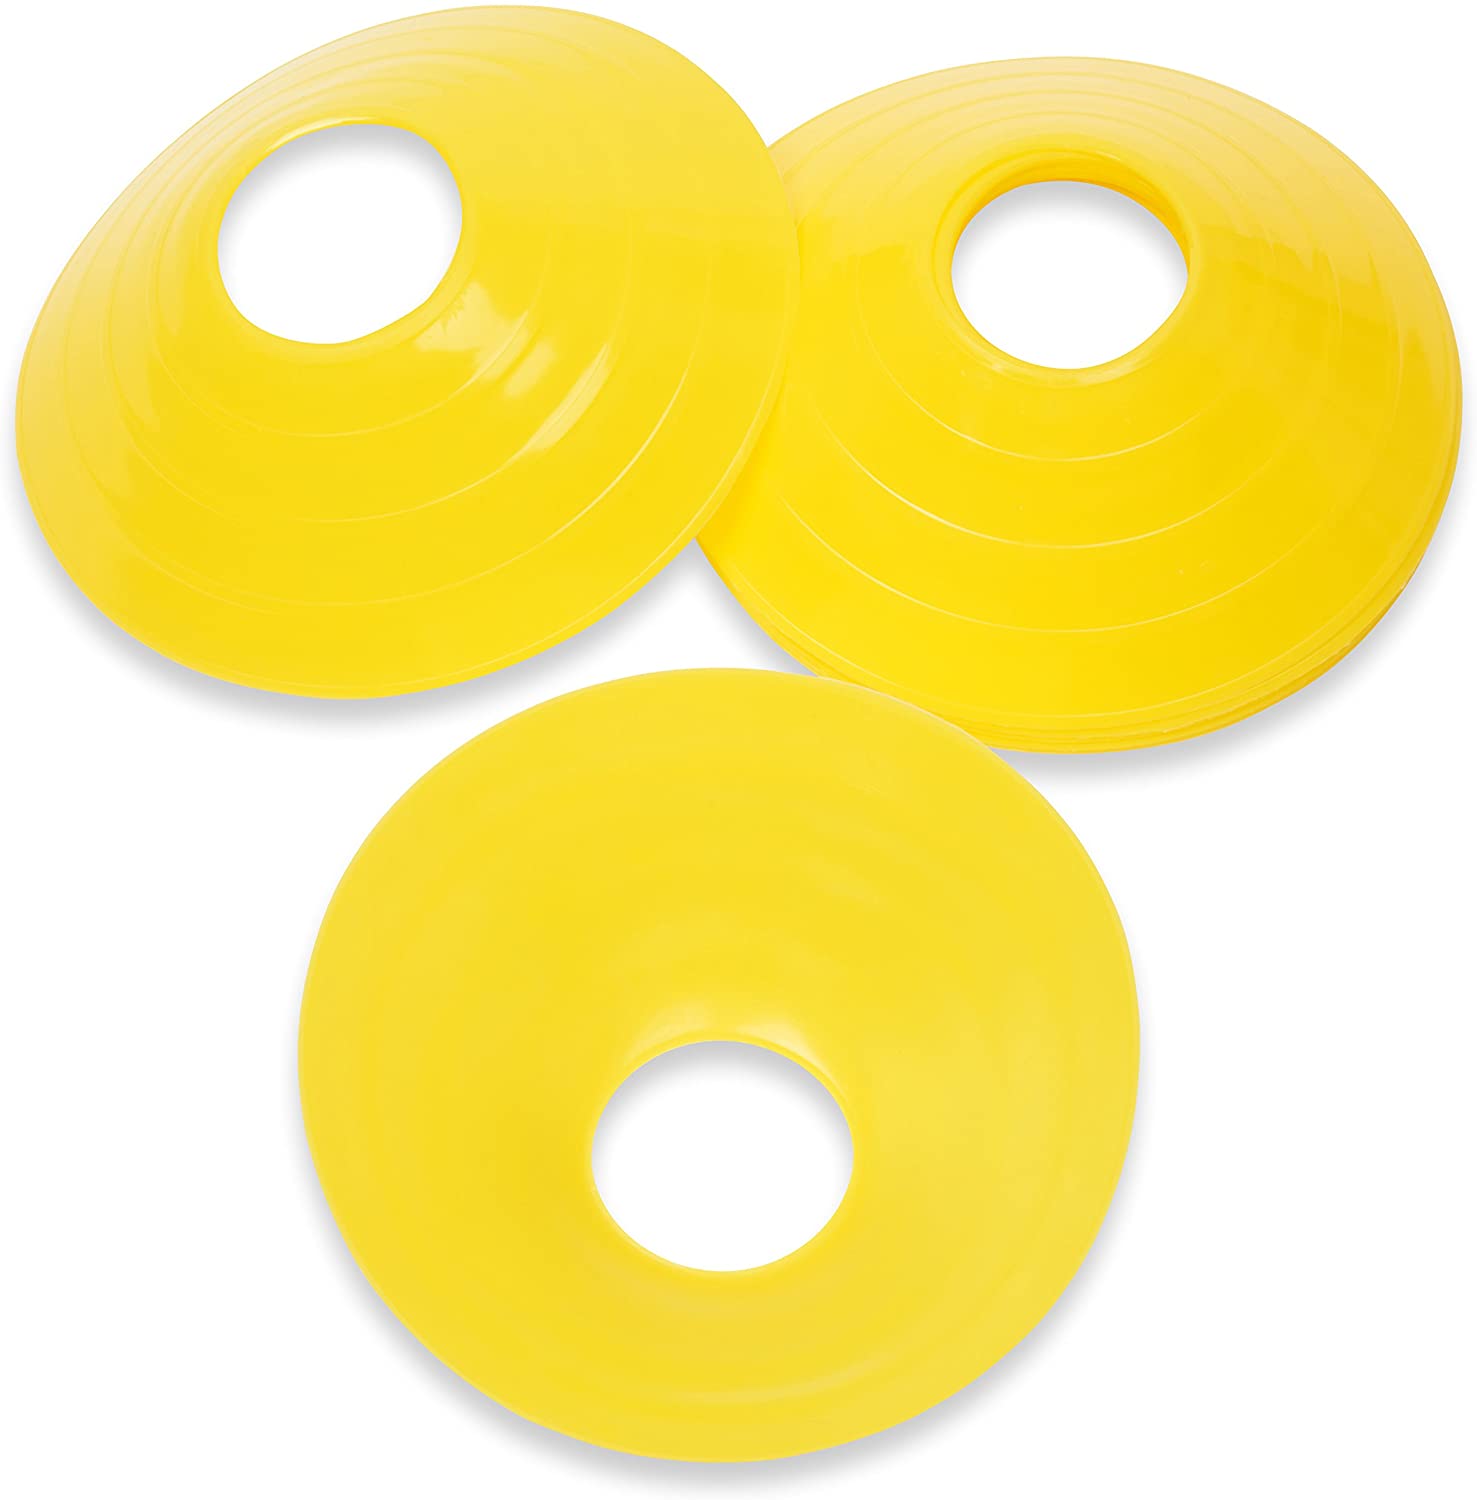 Unlimited Potential Set of 10 Training Goal-Line Sports Field Markers Disc Cones (Yellow) - e4cents